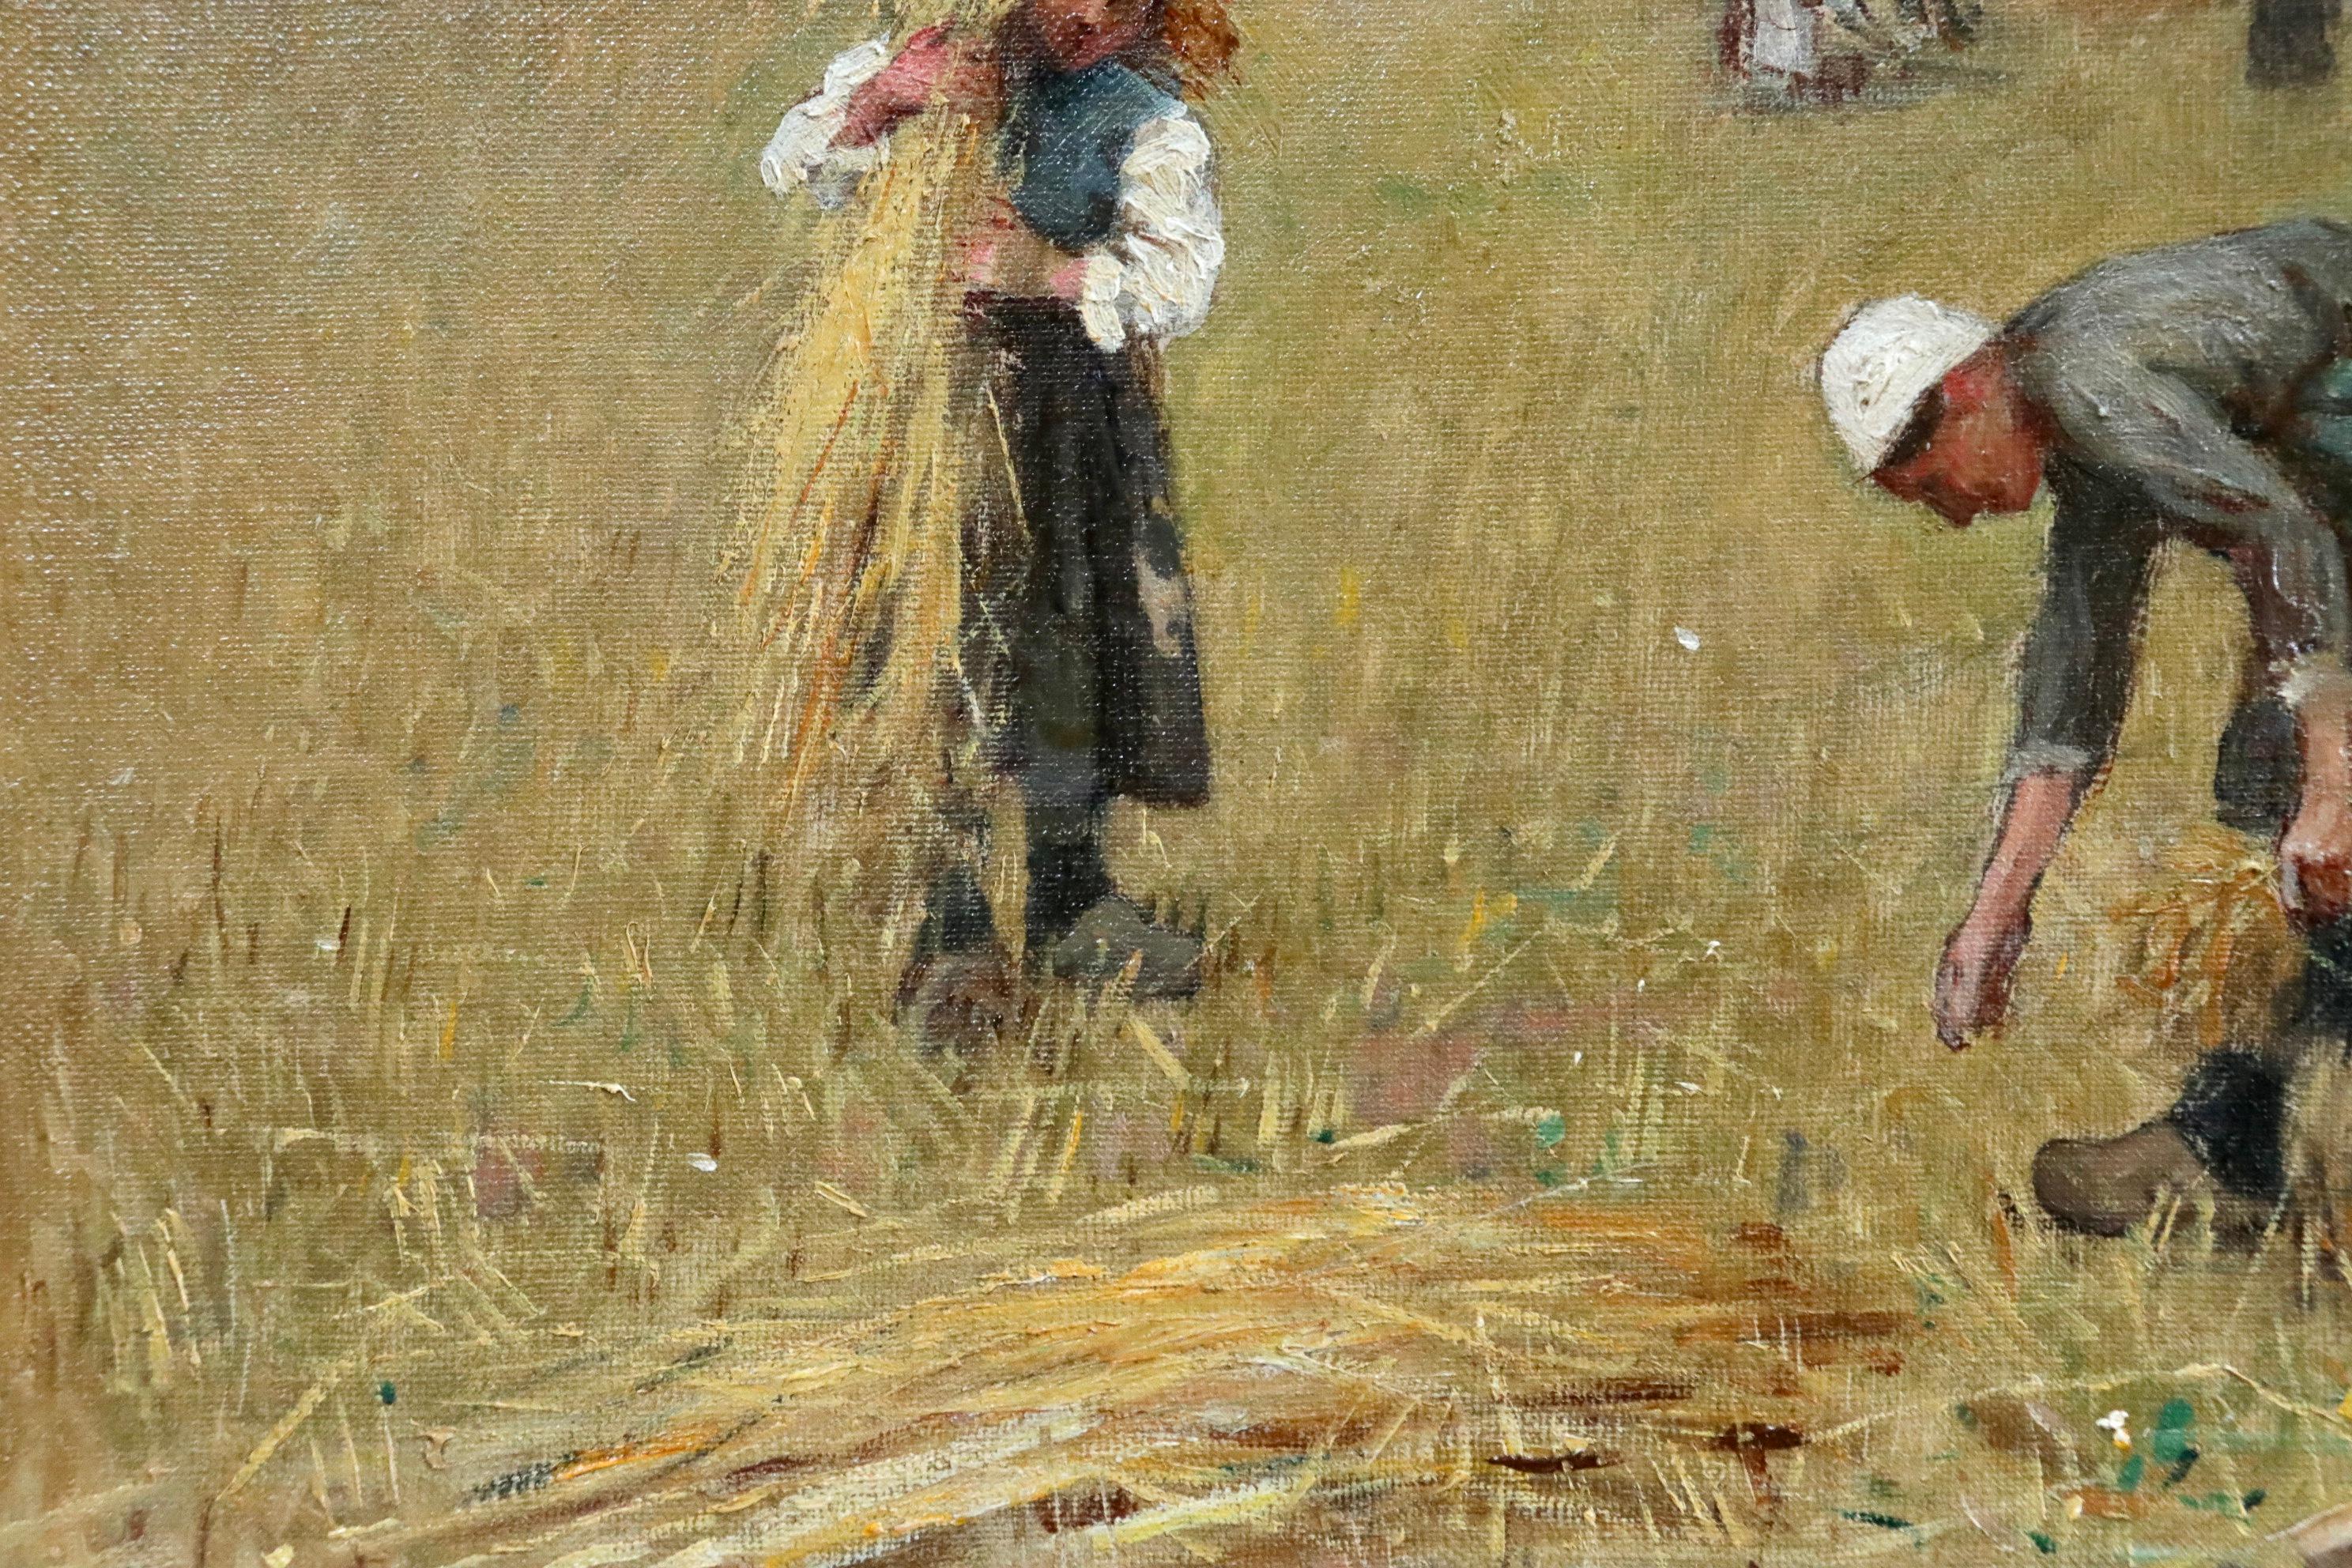 A turn of the century oil on canvas by Rene Louis Chretien depicting men and women harvesting the crop in late summer. Signed lower right. This painting is not currently framed but a suitable frame can be sourced if required.

Provenance:
Private